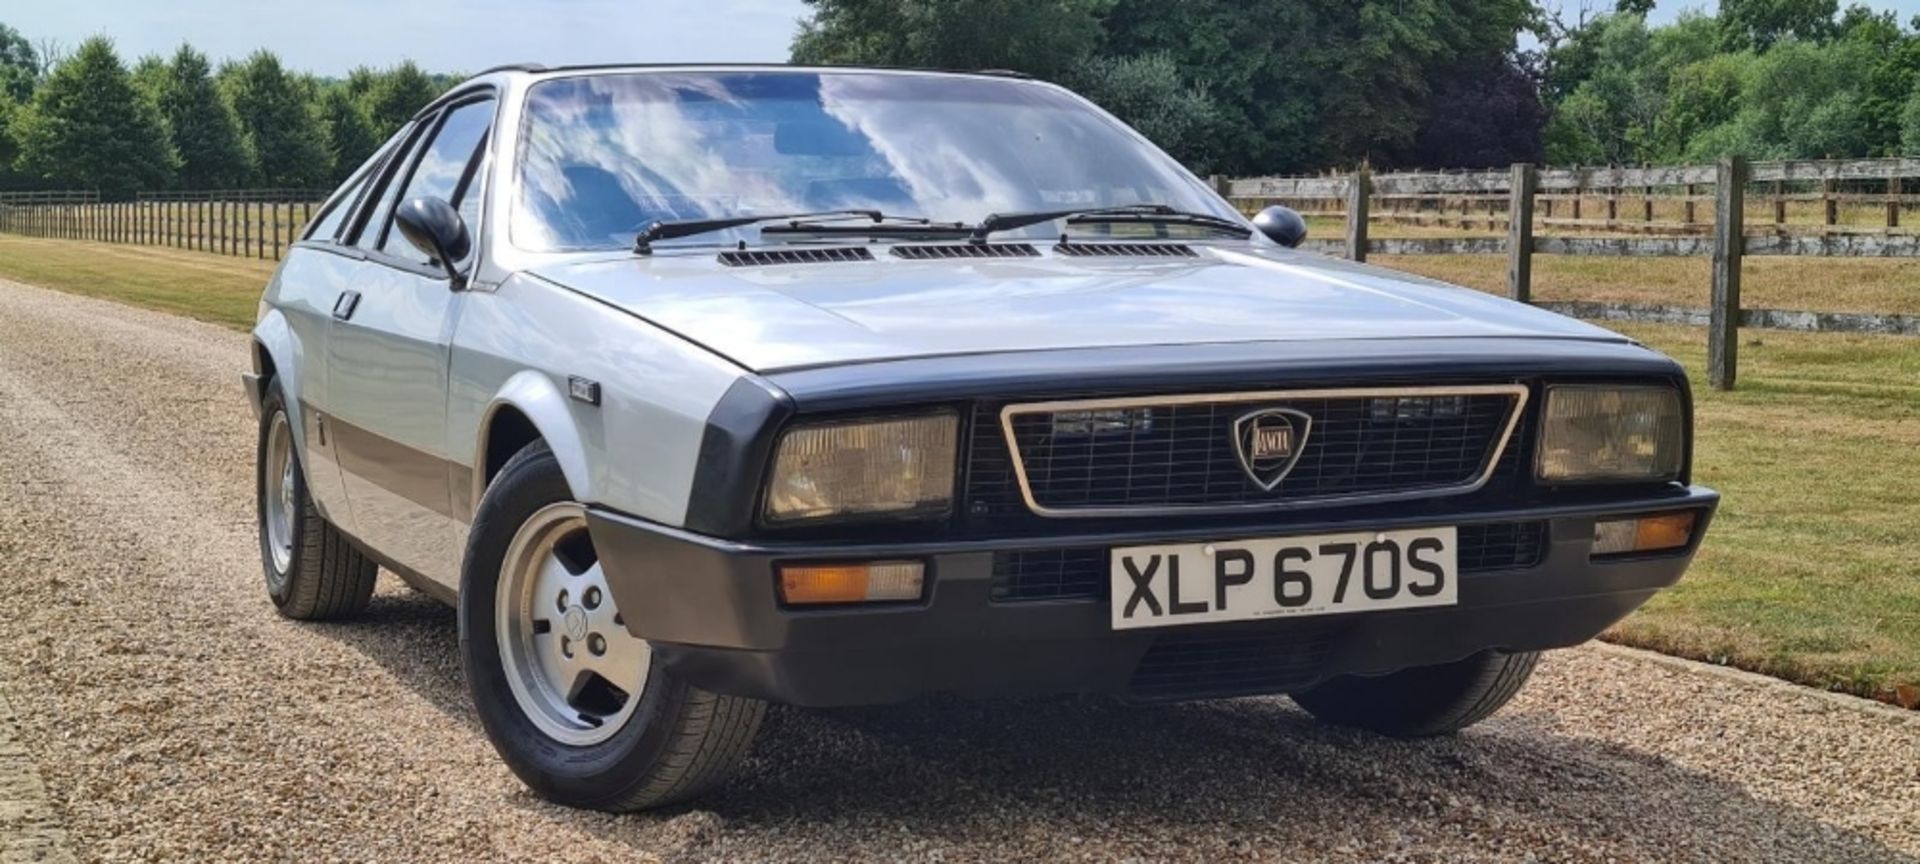 1978 LANCIA MONTECARLO SPIDER Registration Number: XLP 670S Chassis Number: TBA Recorded Mileage: - Image 6 of 12